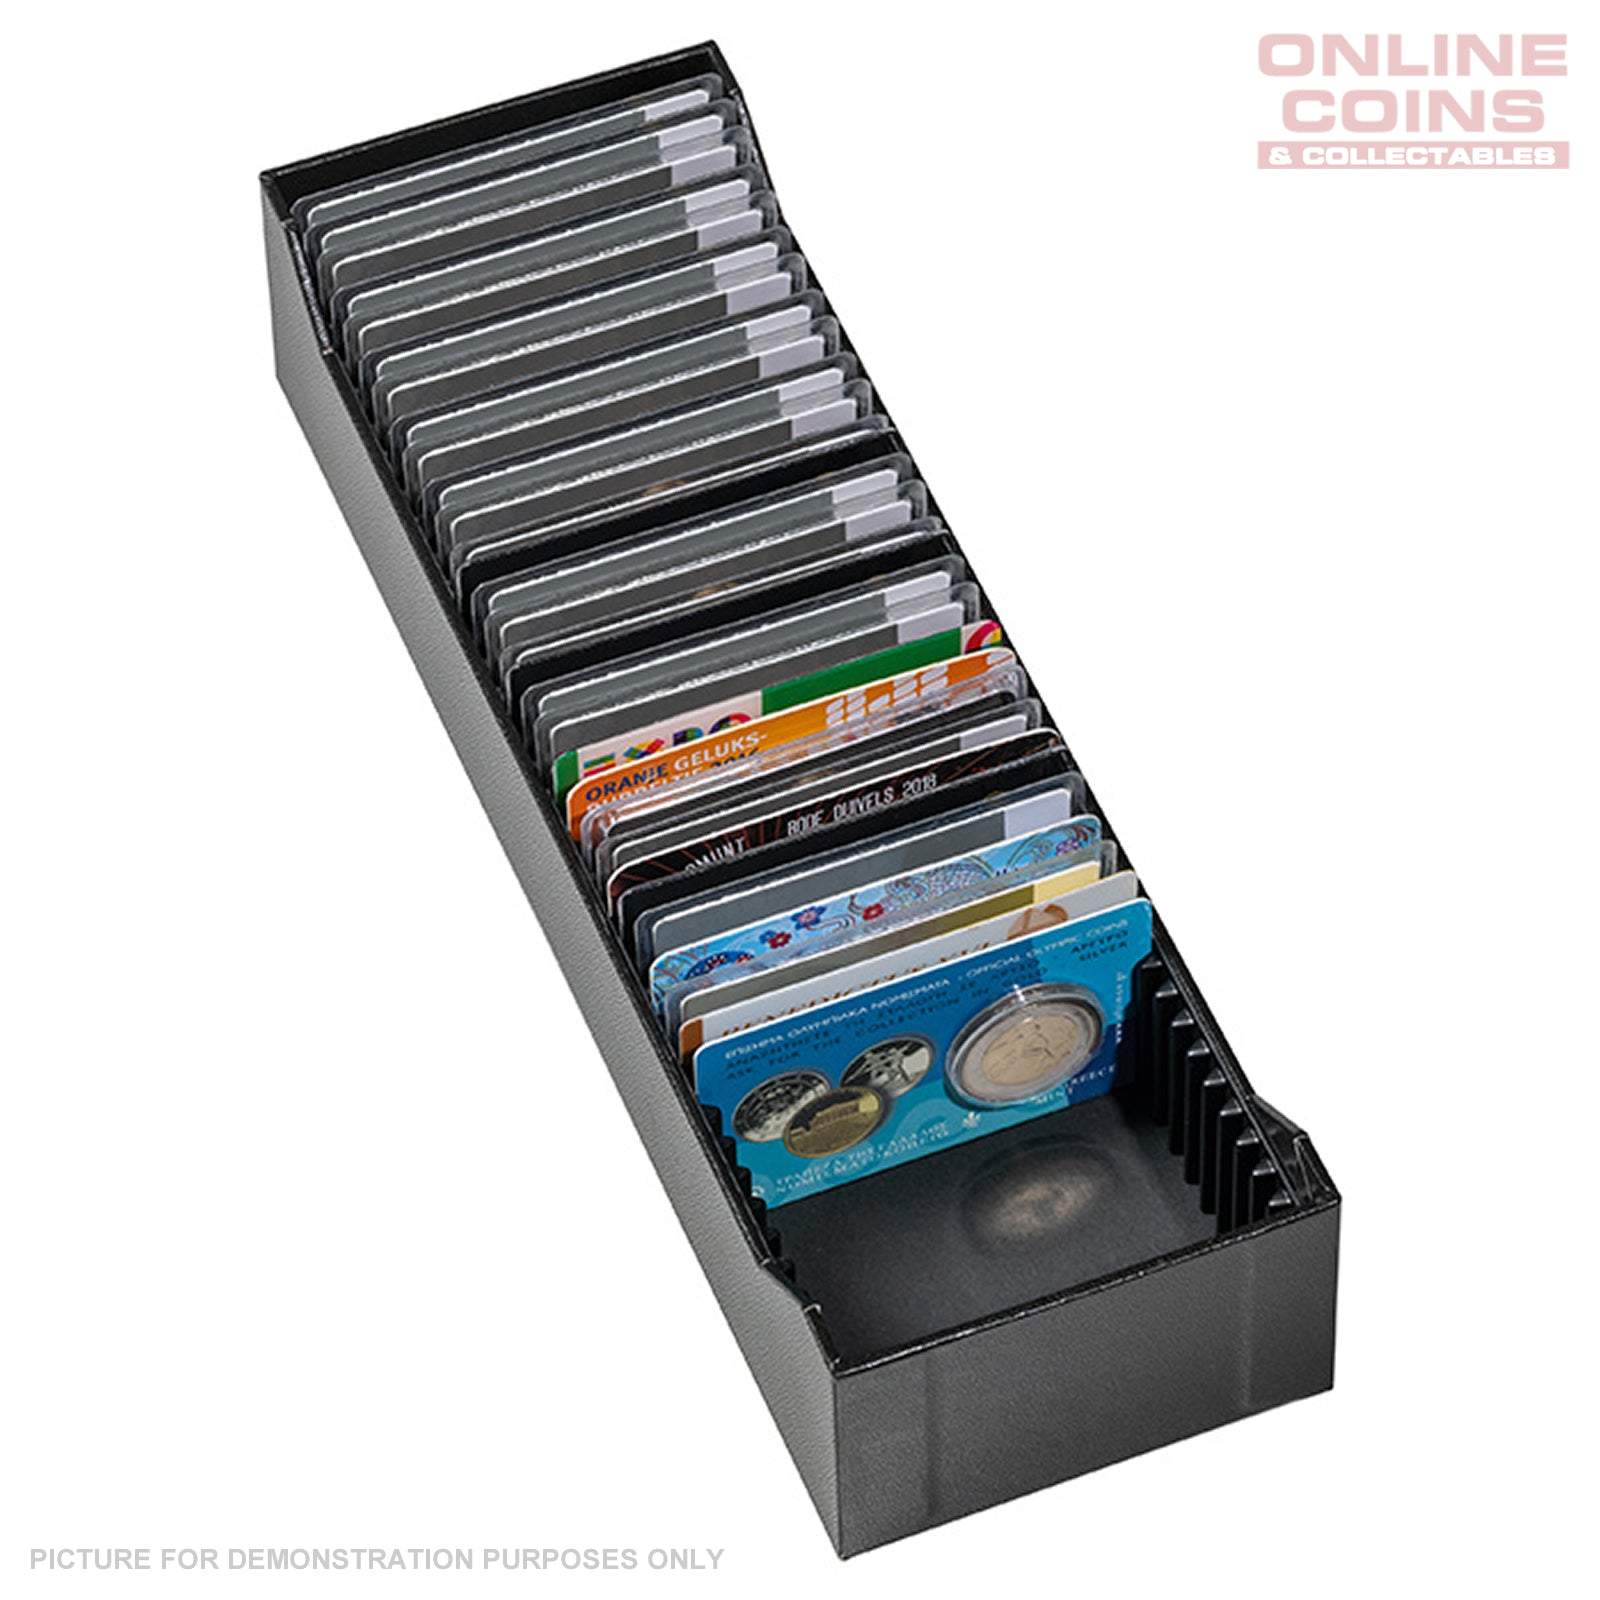 Lighthouse LOGIK Archive Box for 40 Gold Bar Blisters or Coin Cards -  Horizontal, Black